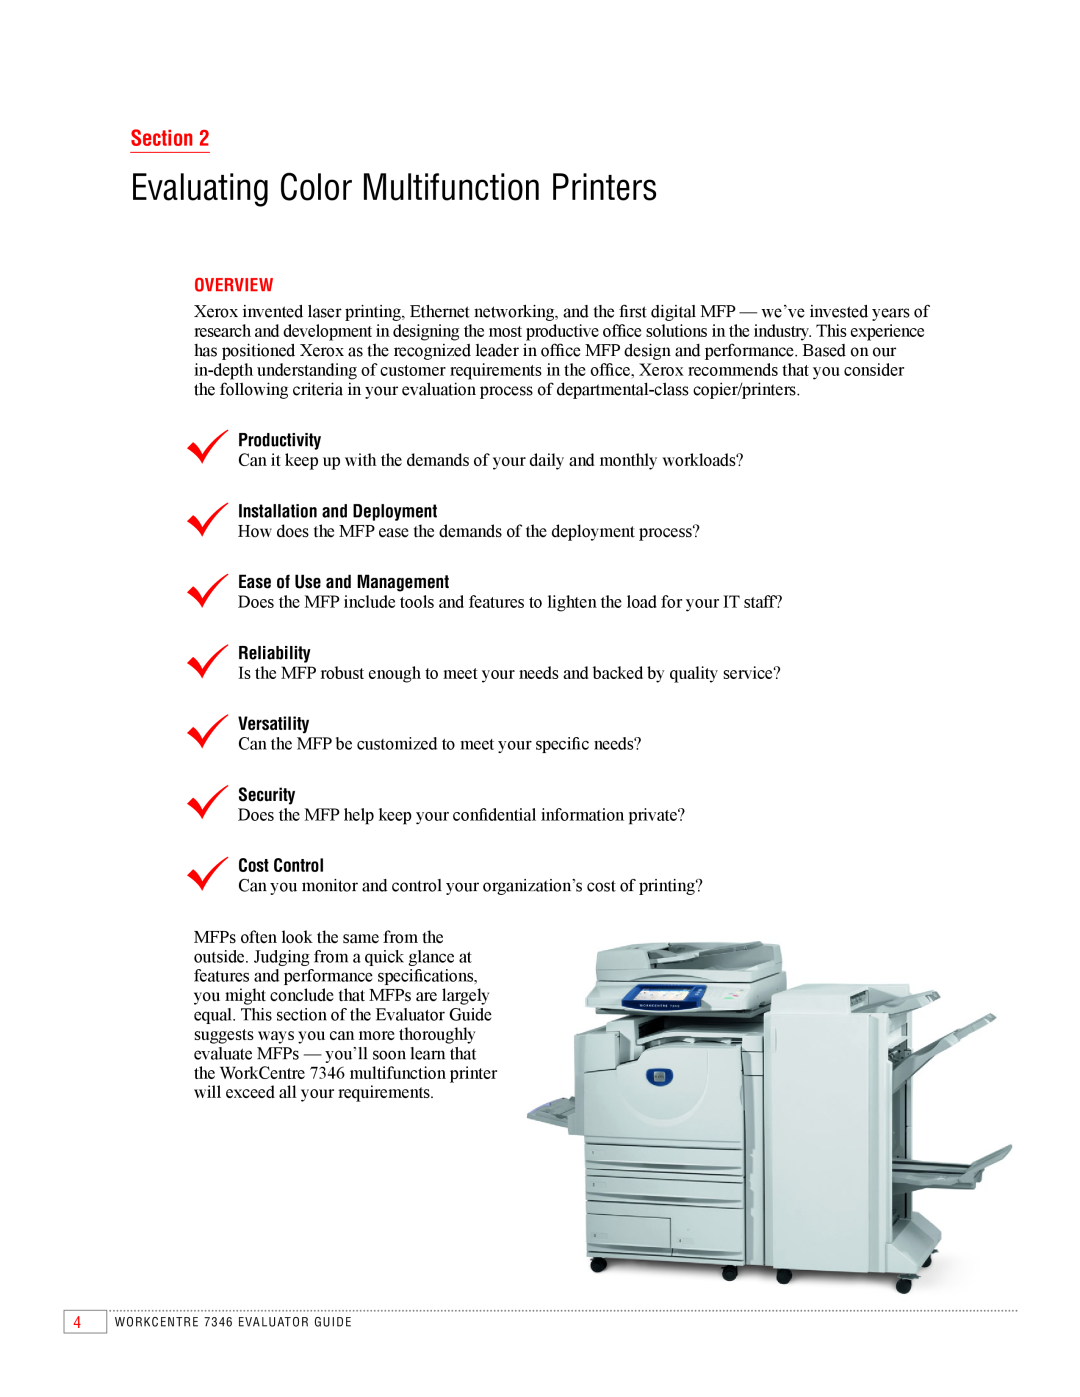 Xerox 7346 Evaluating Color Multifunction Printers, Section, Overview, Productivity, Installation and Deployment, Security 